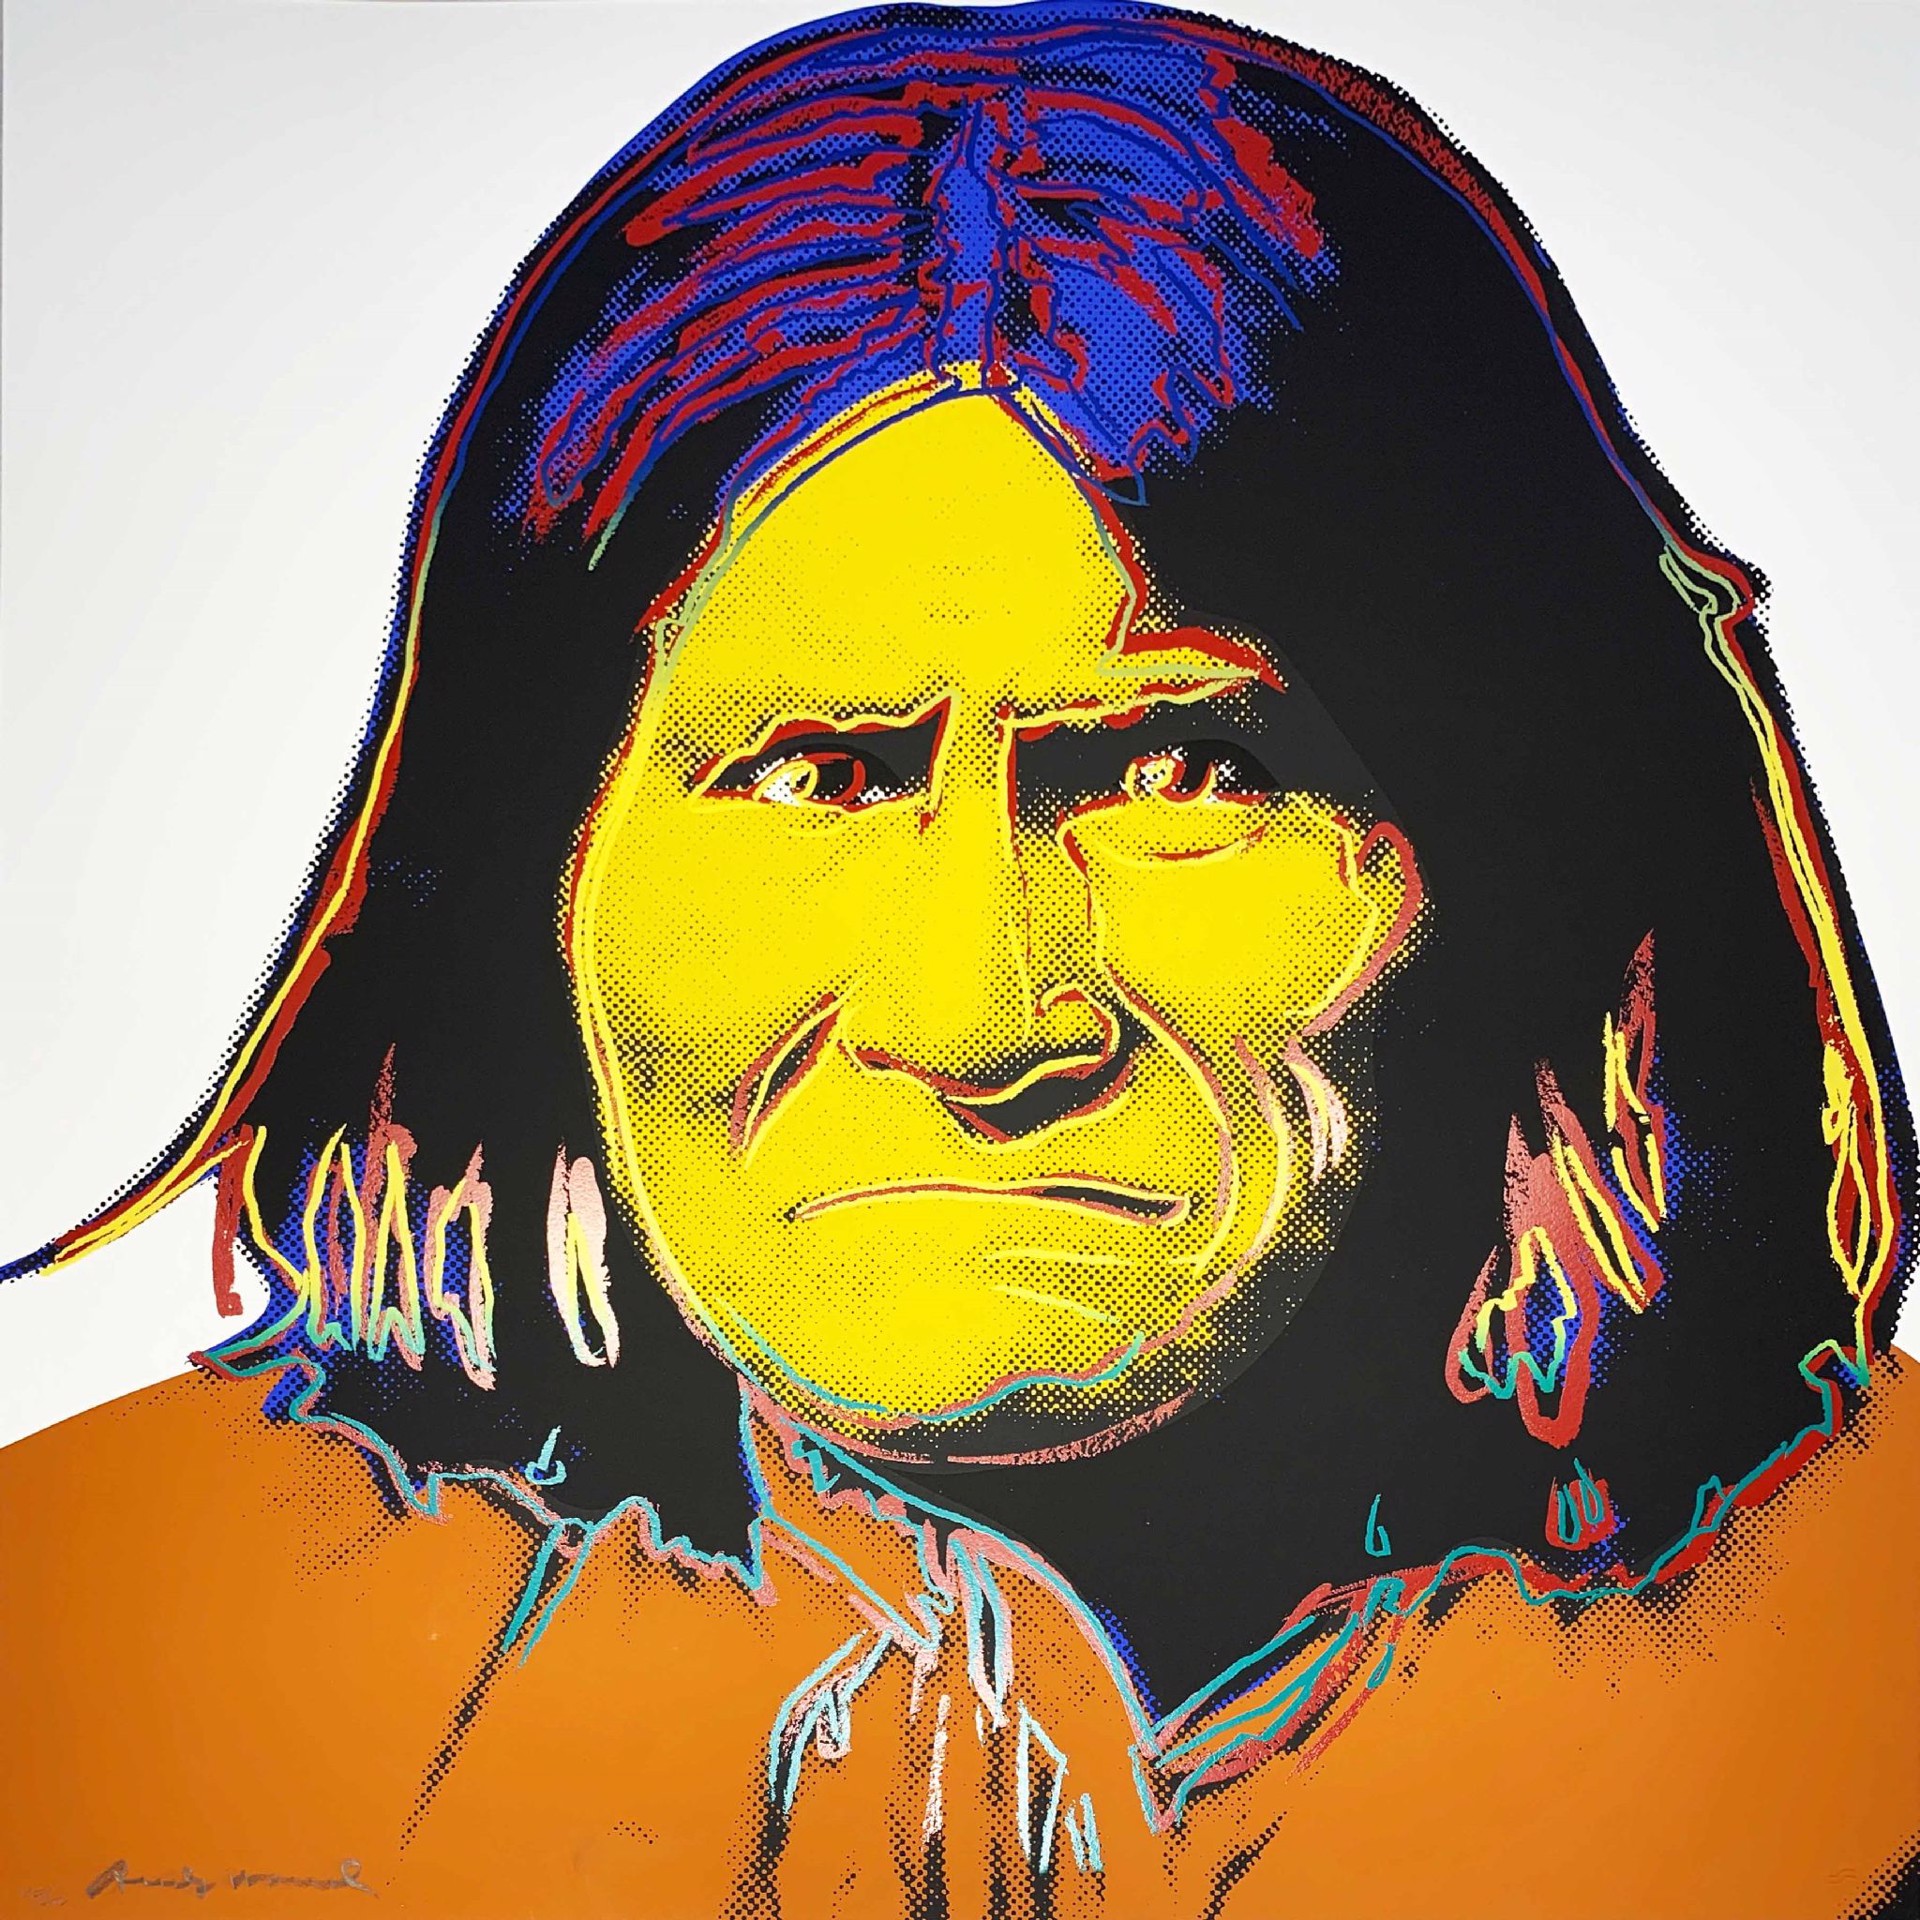 Cowboys and Indians: Geronimo, II.384 by Andy Warhol